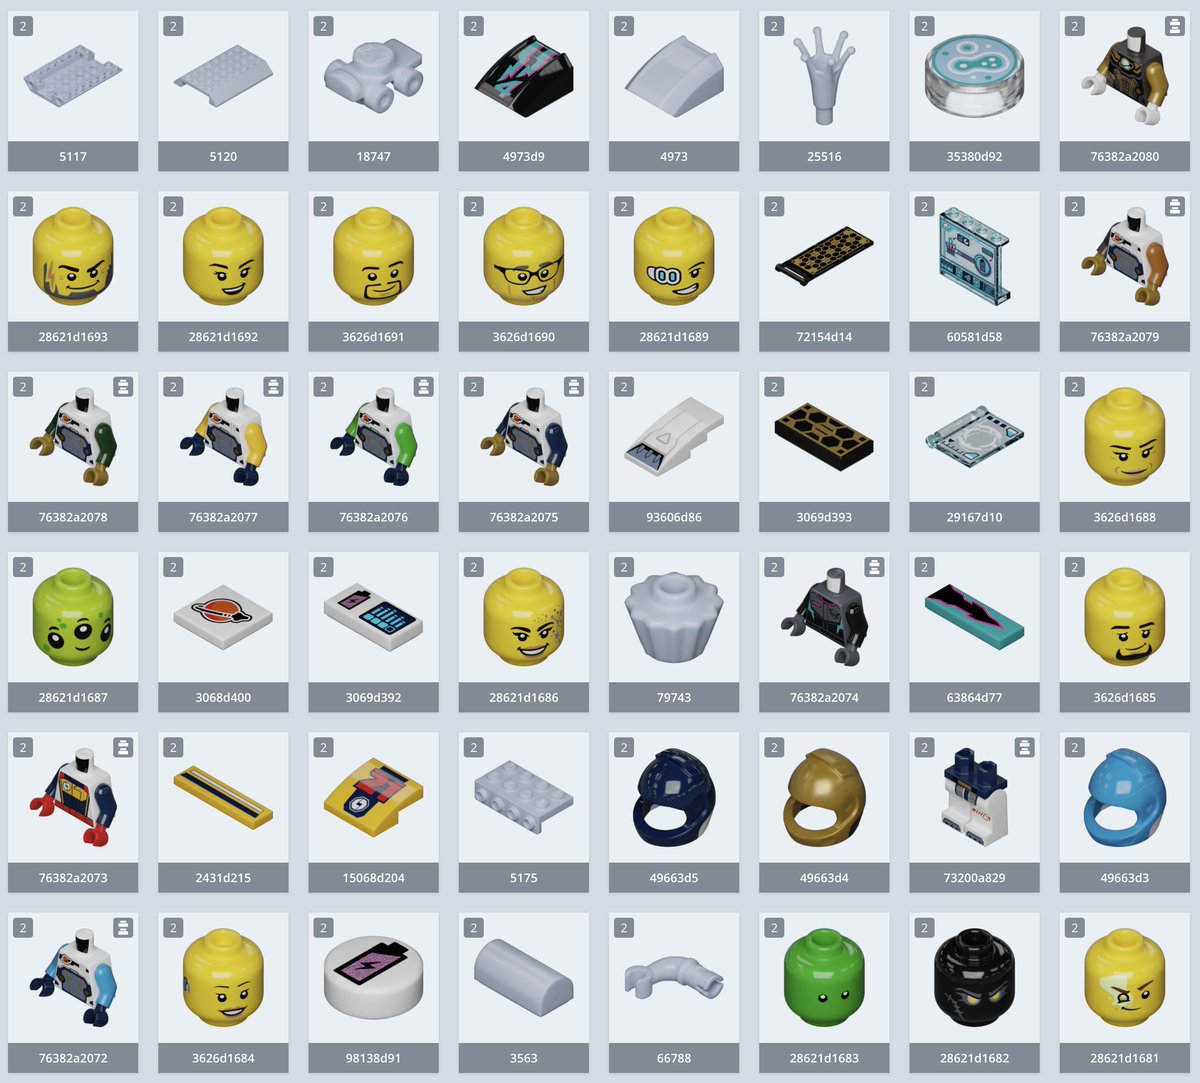 A bunch of new elements on #mecabricks